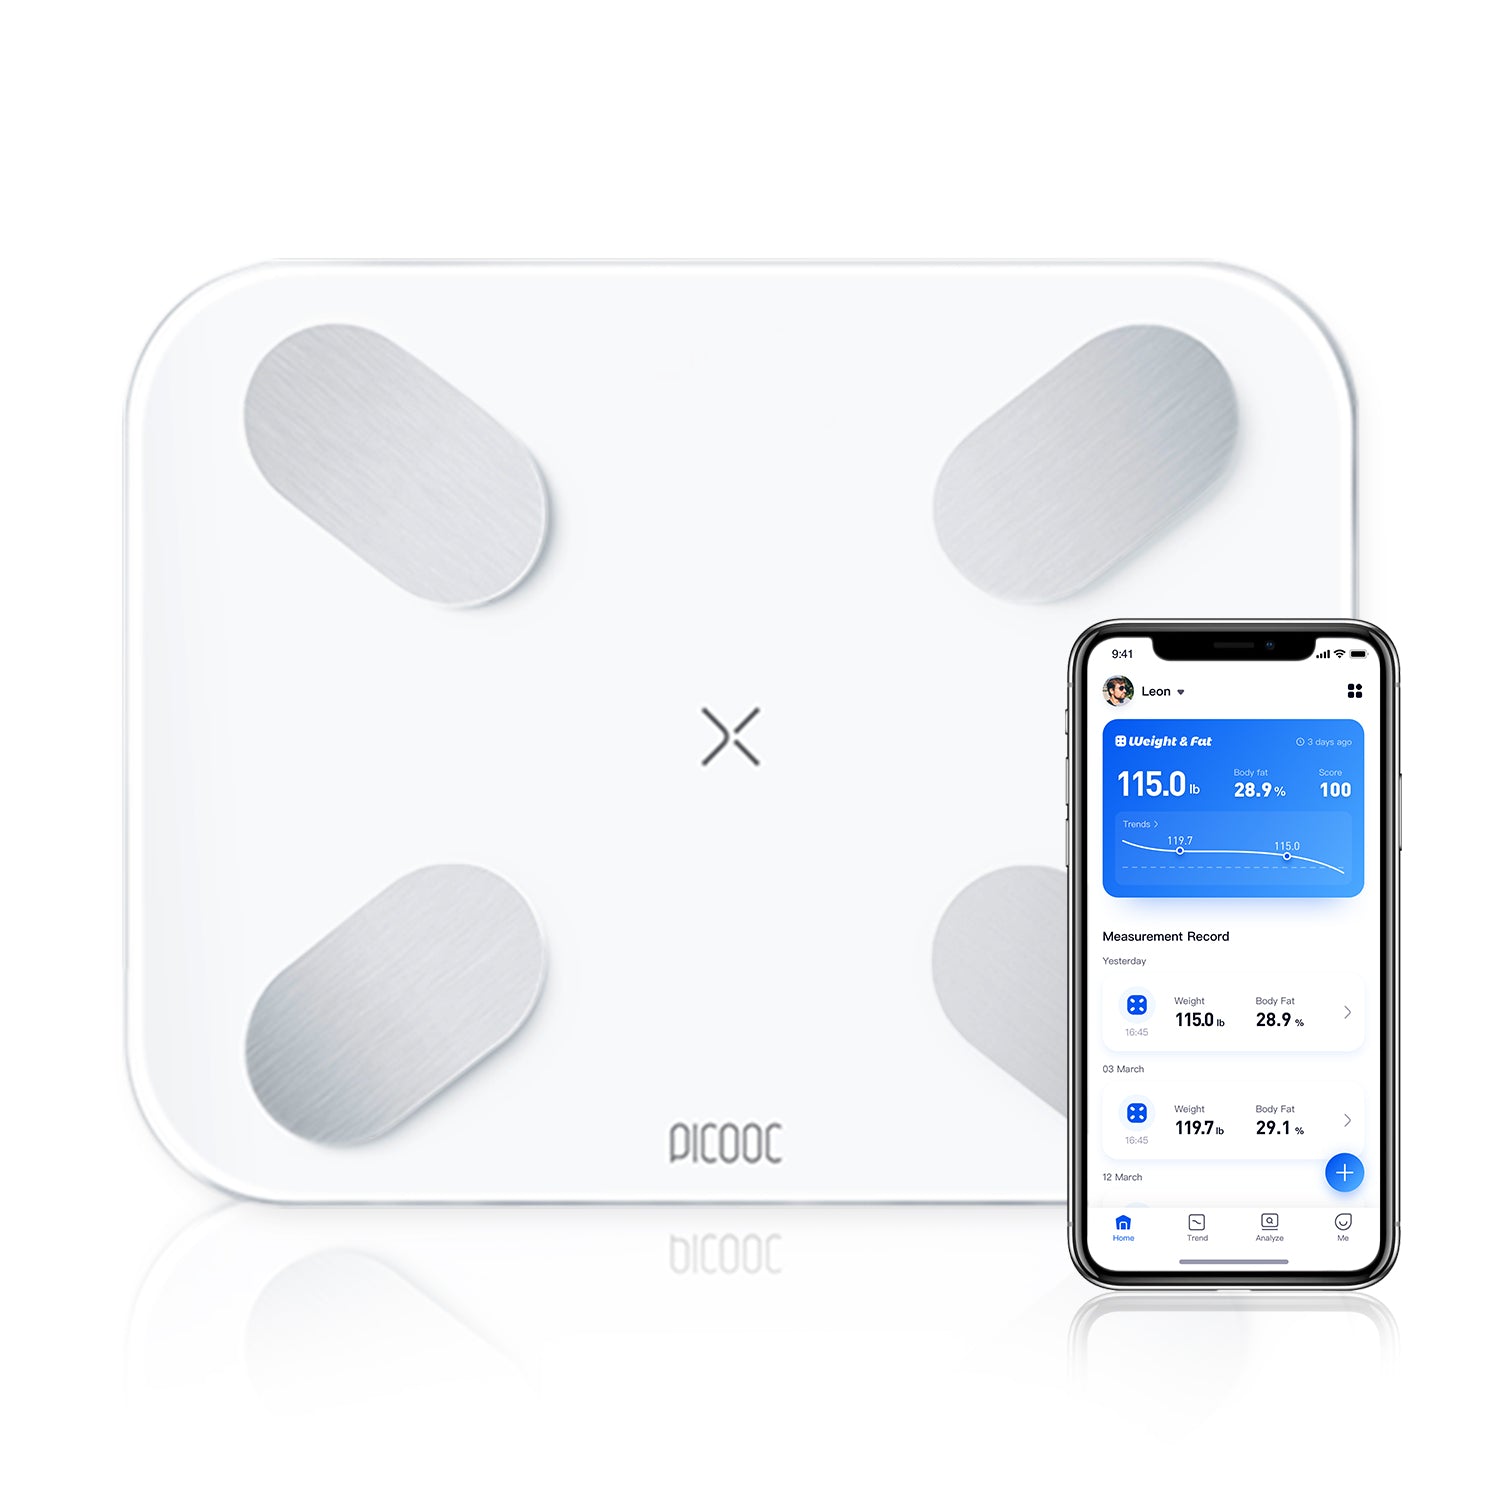 PICOOC Smart Scale for Body Weight and Fat Georgia